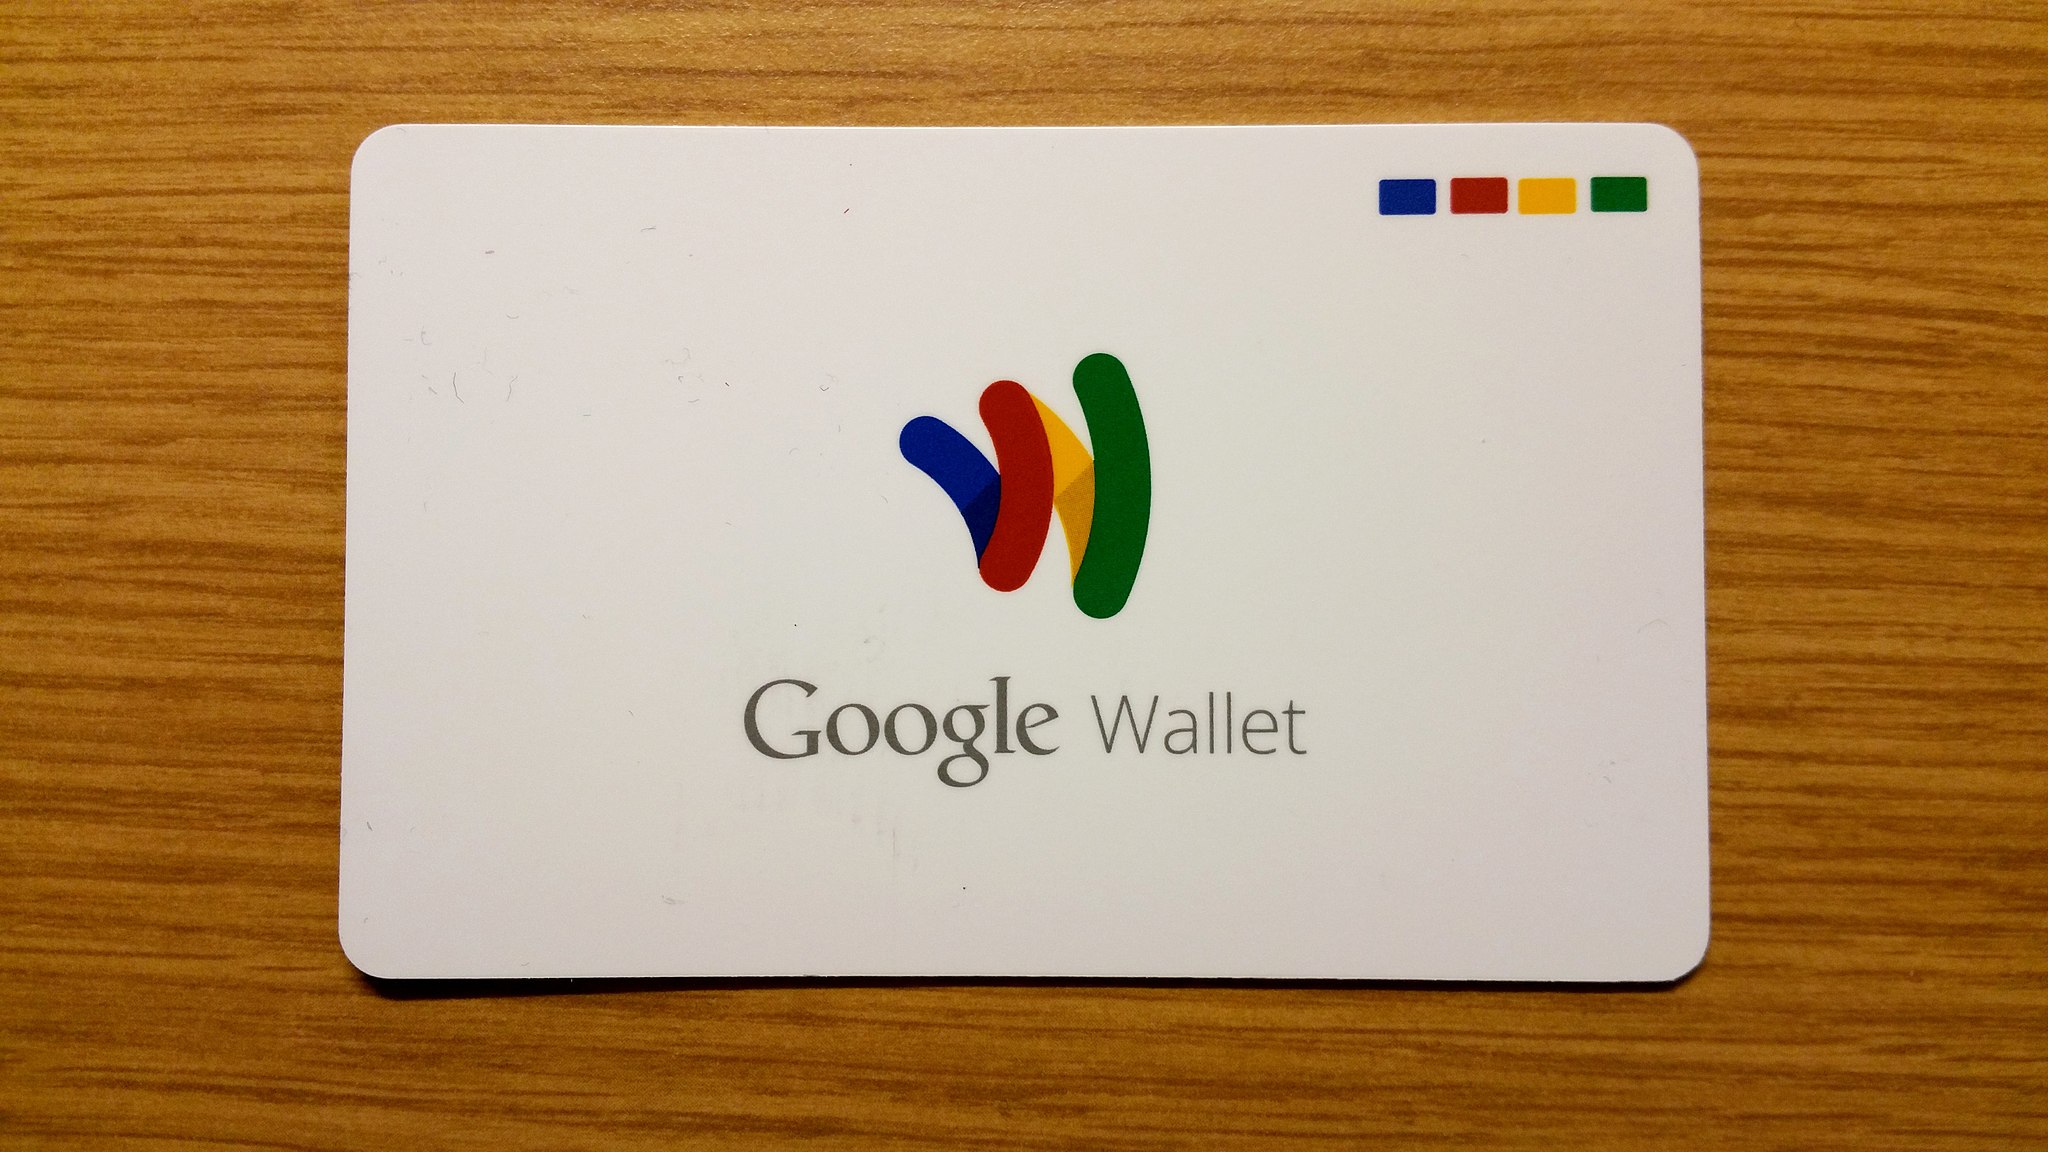 Google to offer personal "smart checking" bank accounts